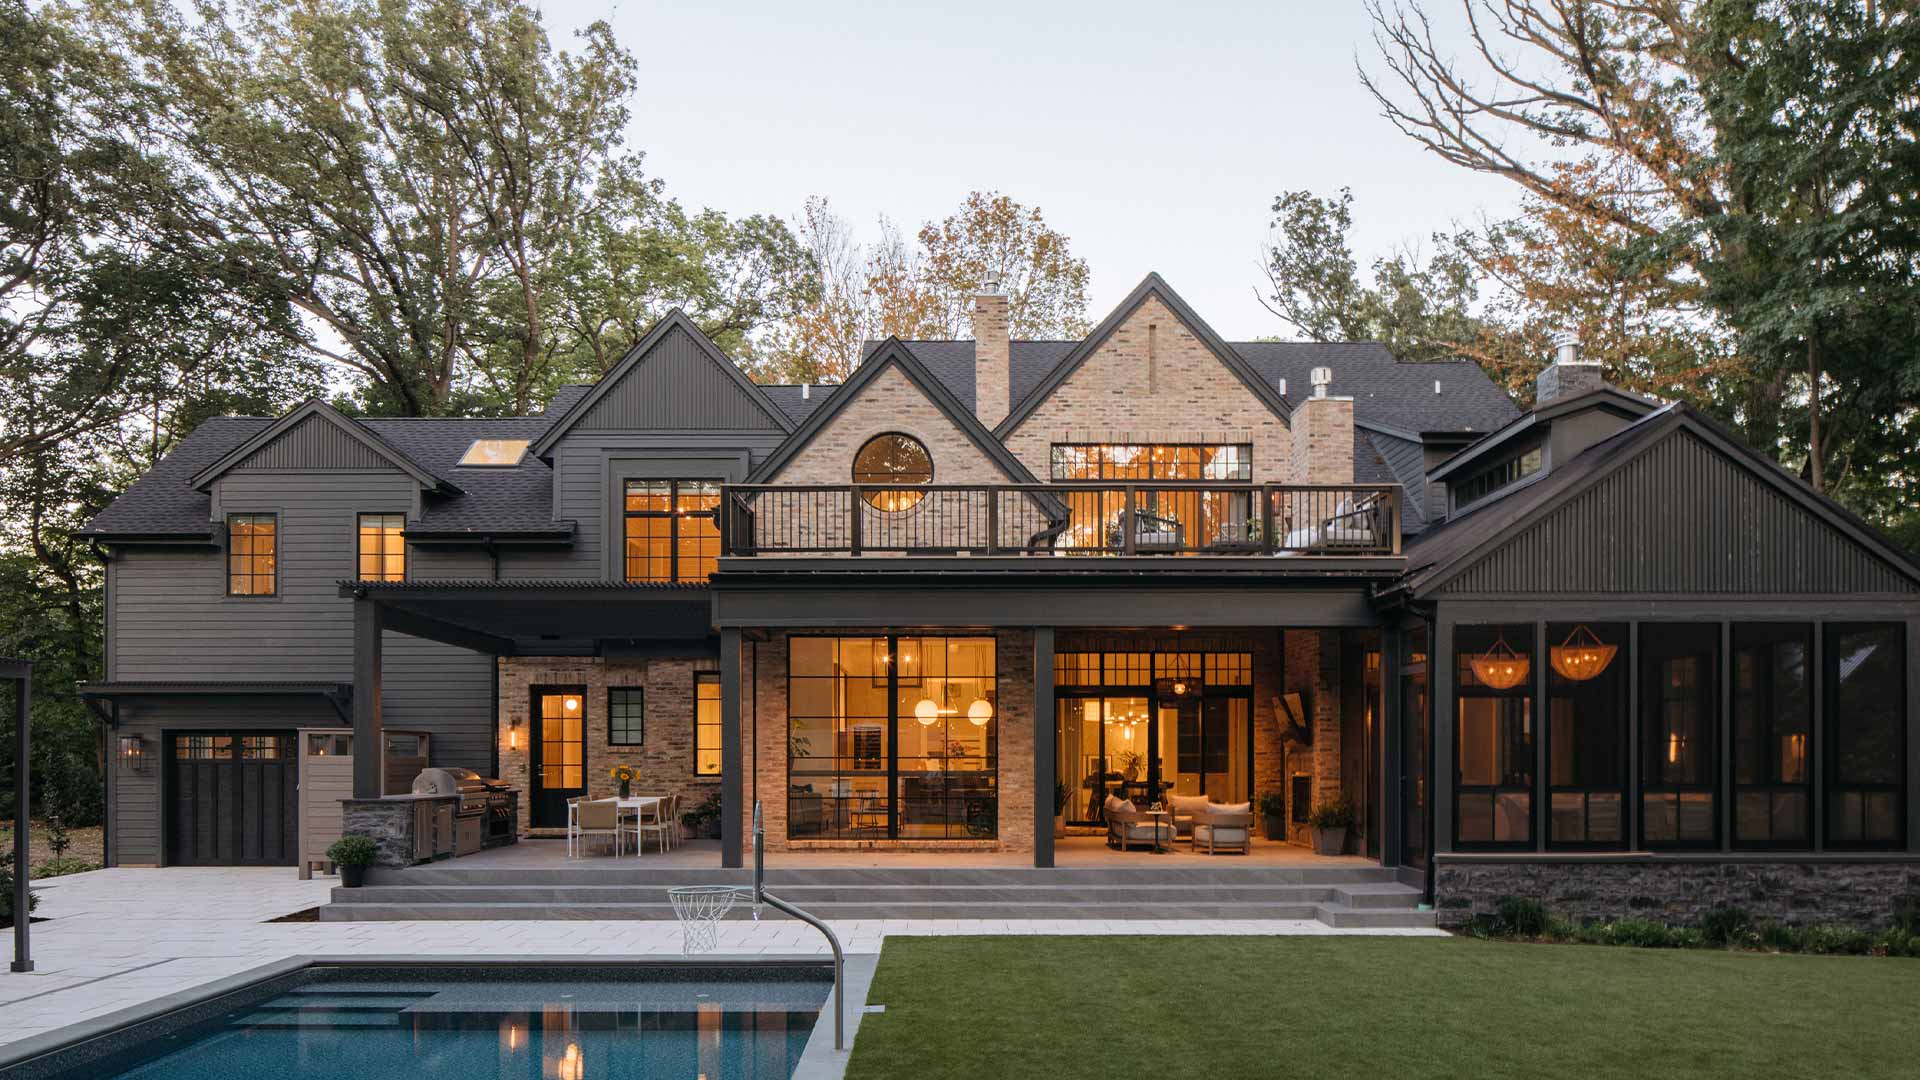 A historic brick home with painted black additions and a multi level outdoor living space